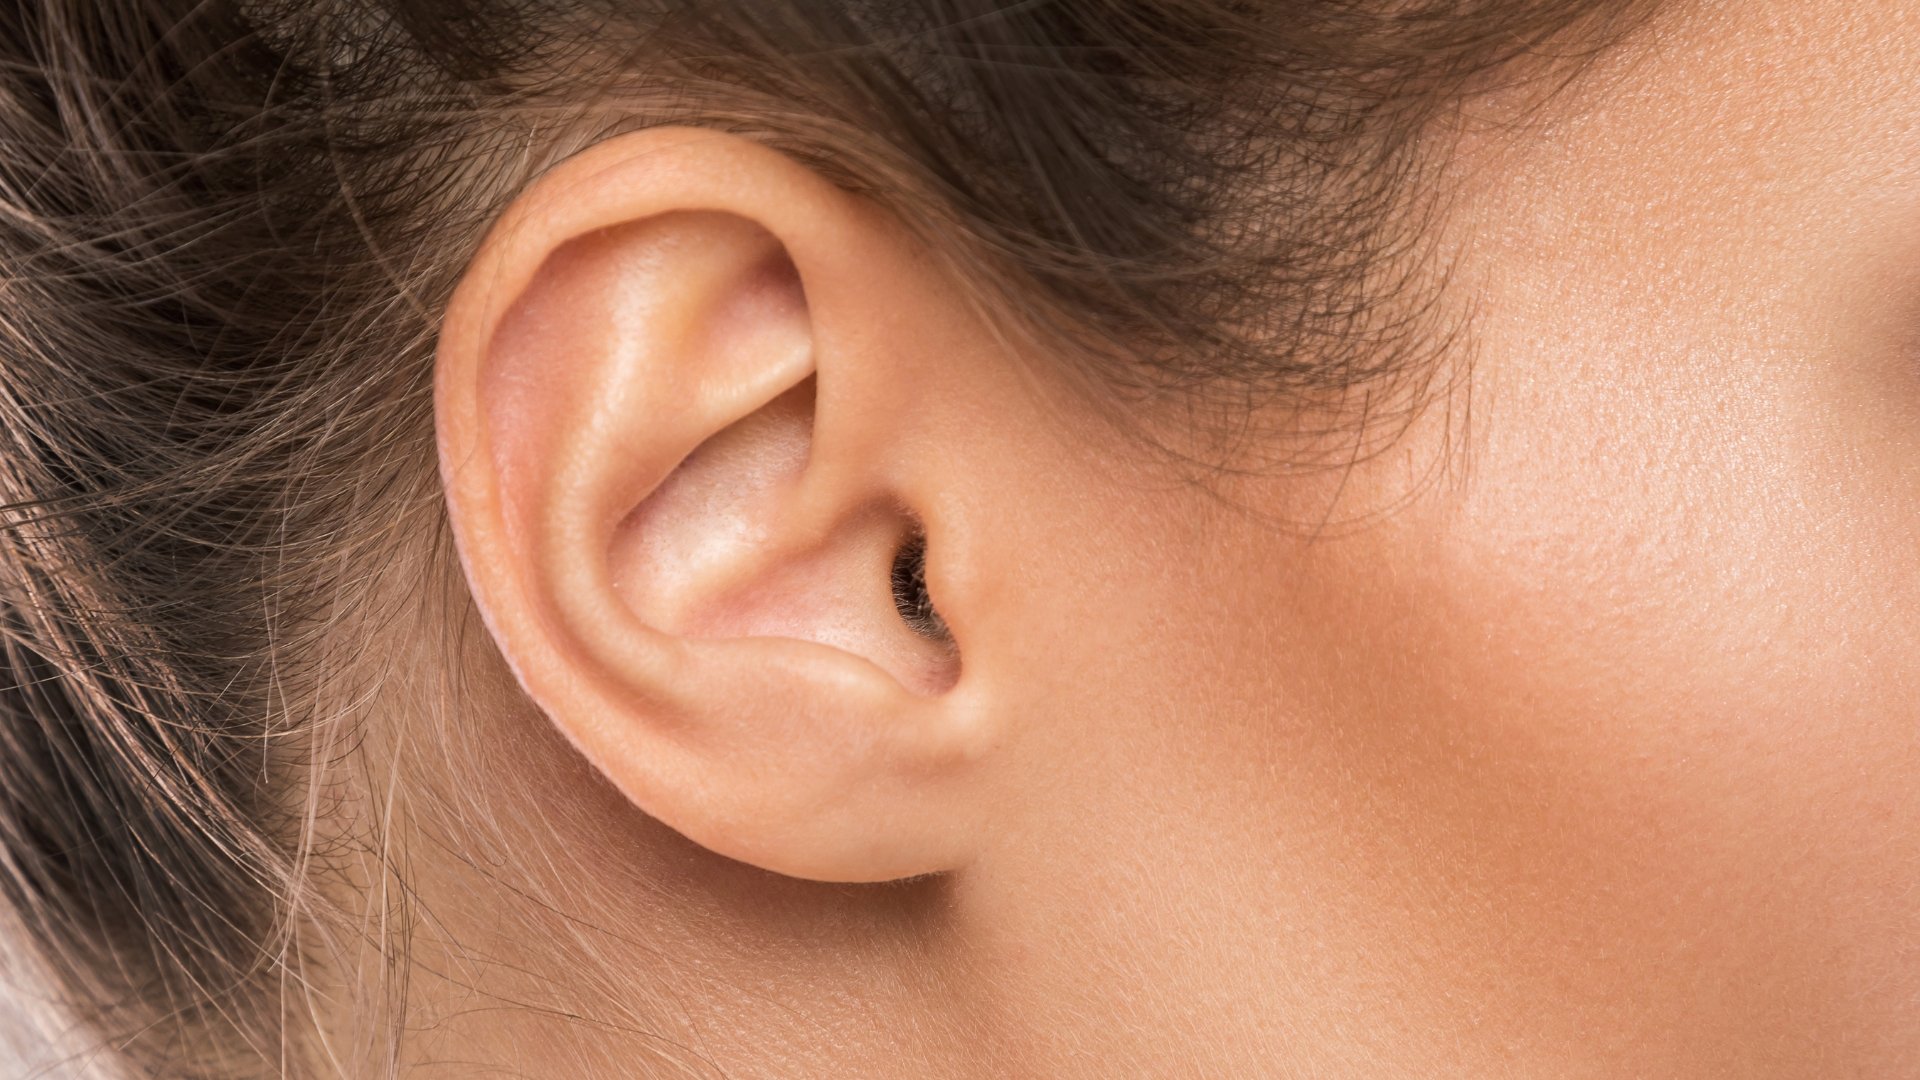 What is the spiritual meaning of tinnitus in the right ear?